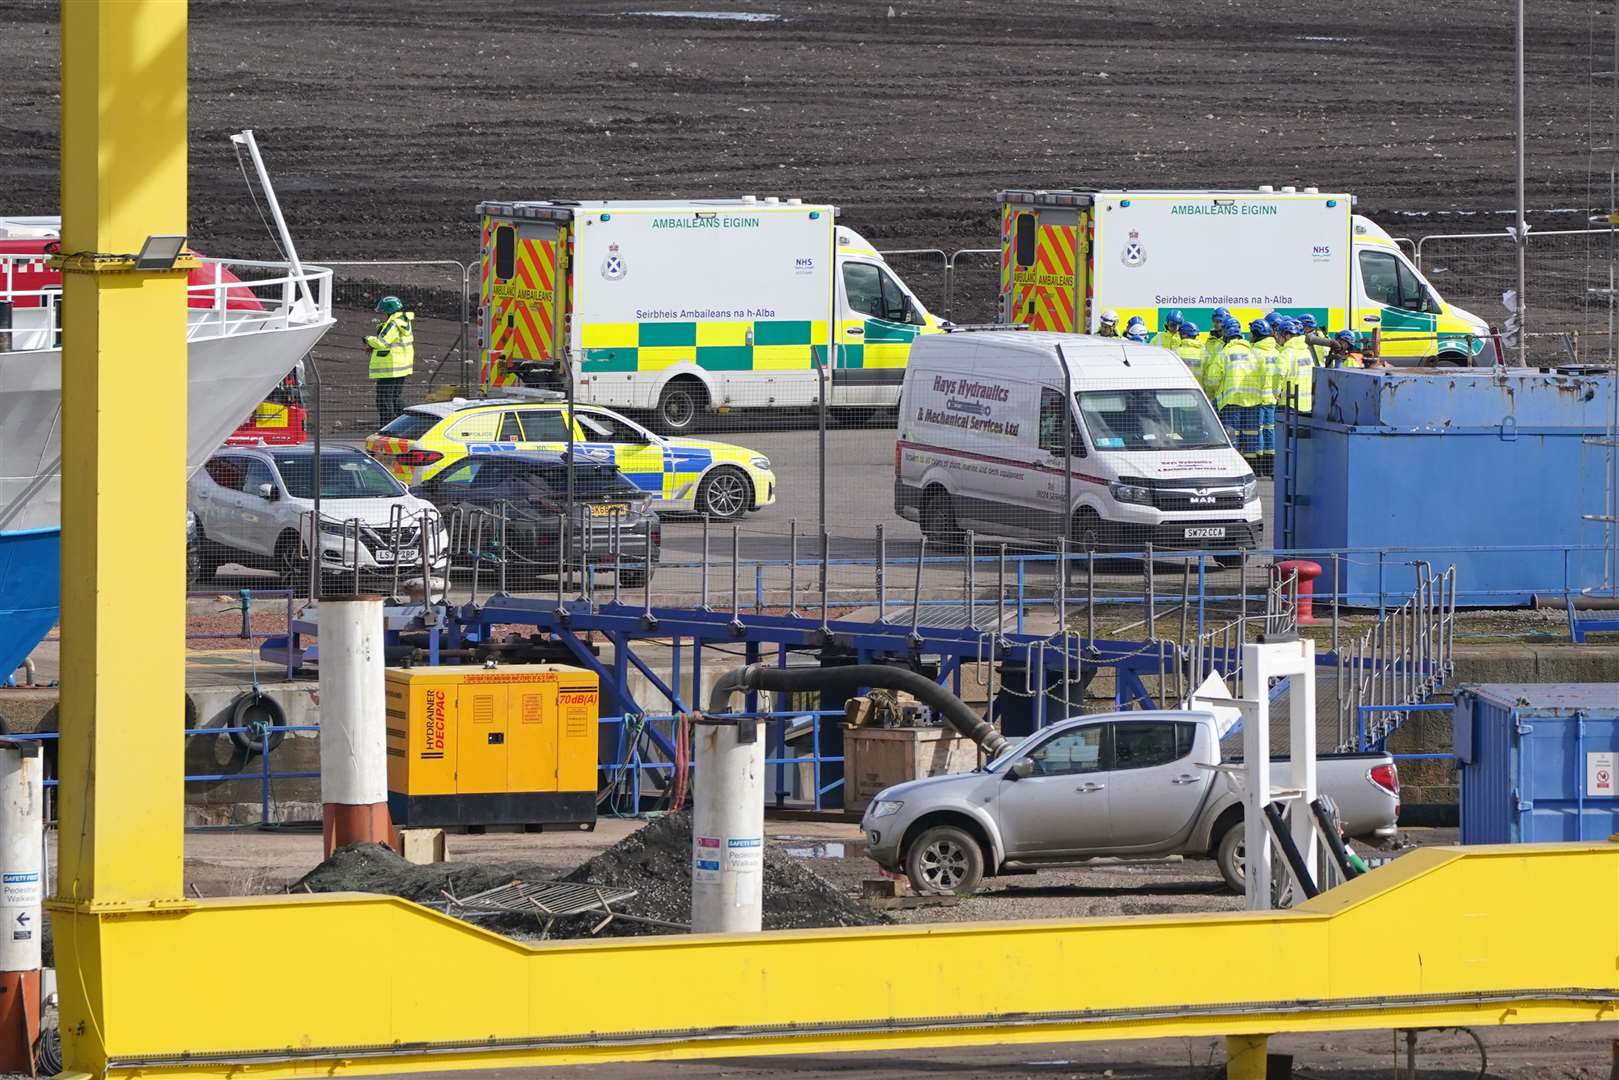 Emergency services at the scene at Imperial Dock in Leith (Andrew Milligan/PA)